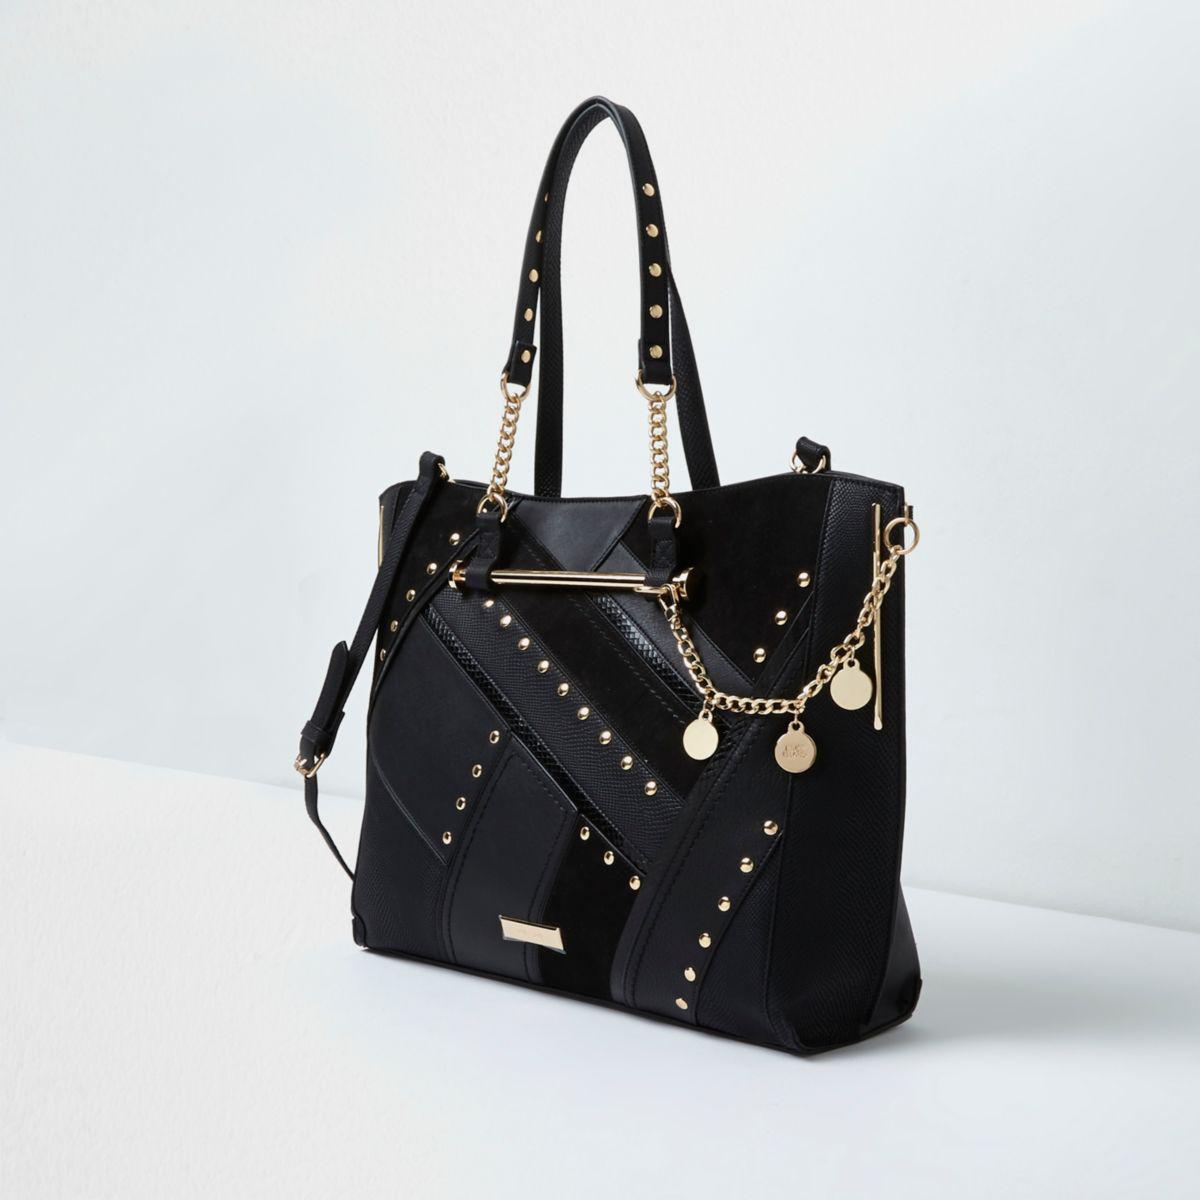 Lyst - River Island Black Studded Cutabout Charm Shopper Tote Bag in Black